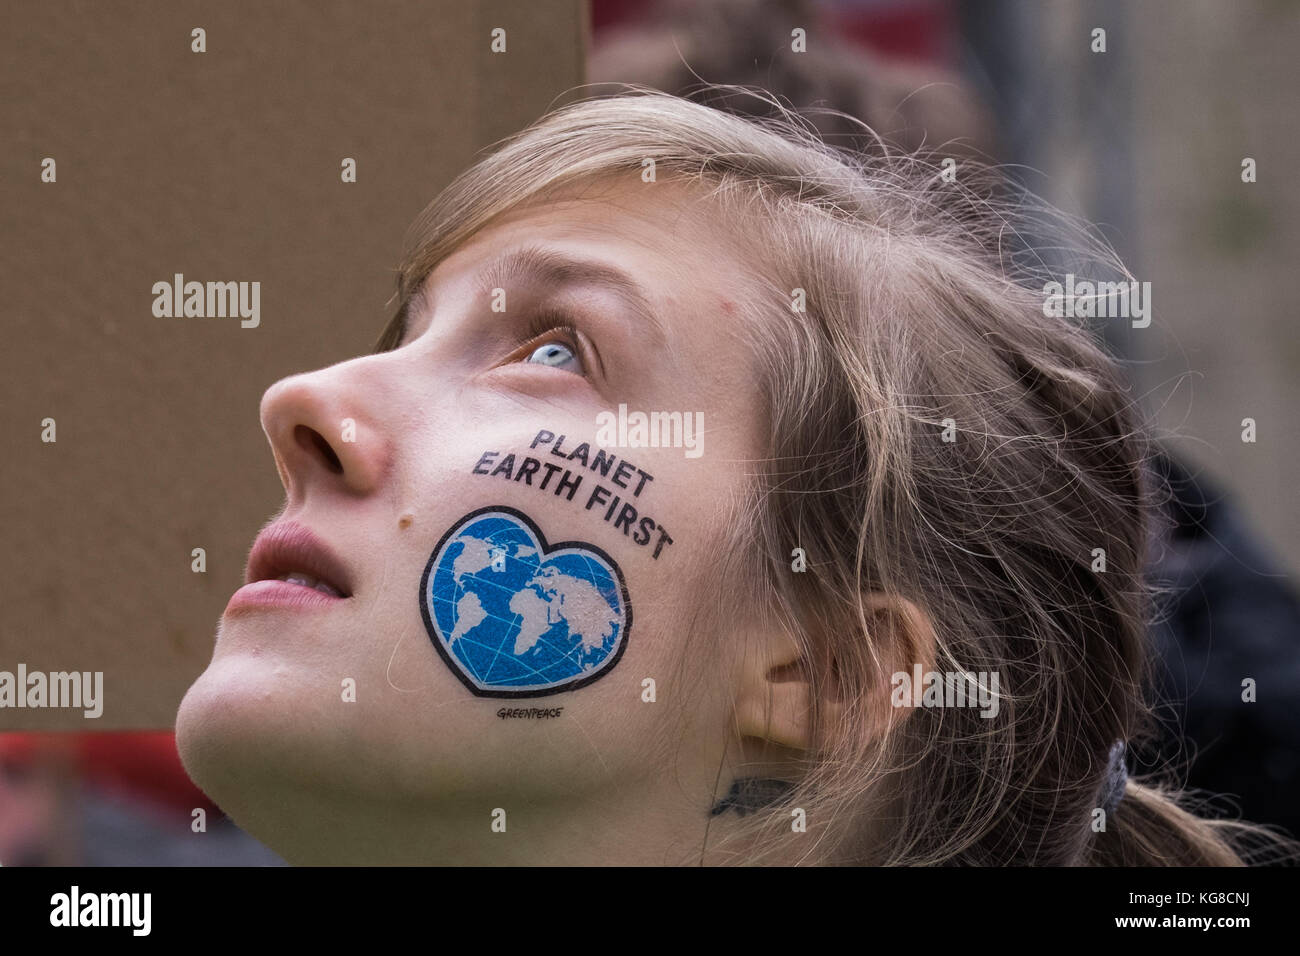 November 4, 2017 - Bonn, North Rhine-Westphalia, Federal Republic of Germany - A woman seen with a tattoo on her cheek written 'Planet Earth First' during the protest. As COP 23 is about to start, 25.000 people gather during the People's March through the streets of Bonn to demand significative and urgent action from the international community on climate change. Credit: Alban Grosdidier/SOPA/ZUMA Wire/Alamy Live News Stock Photo